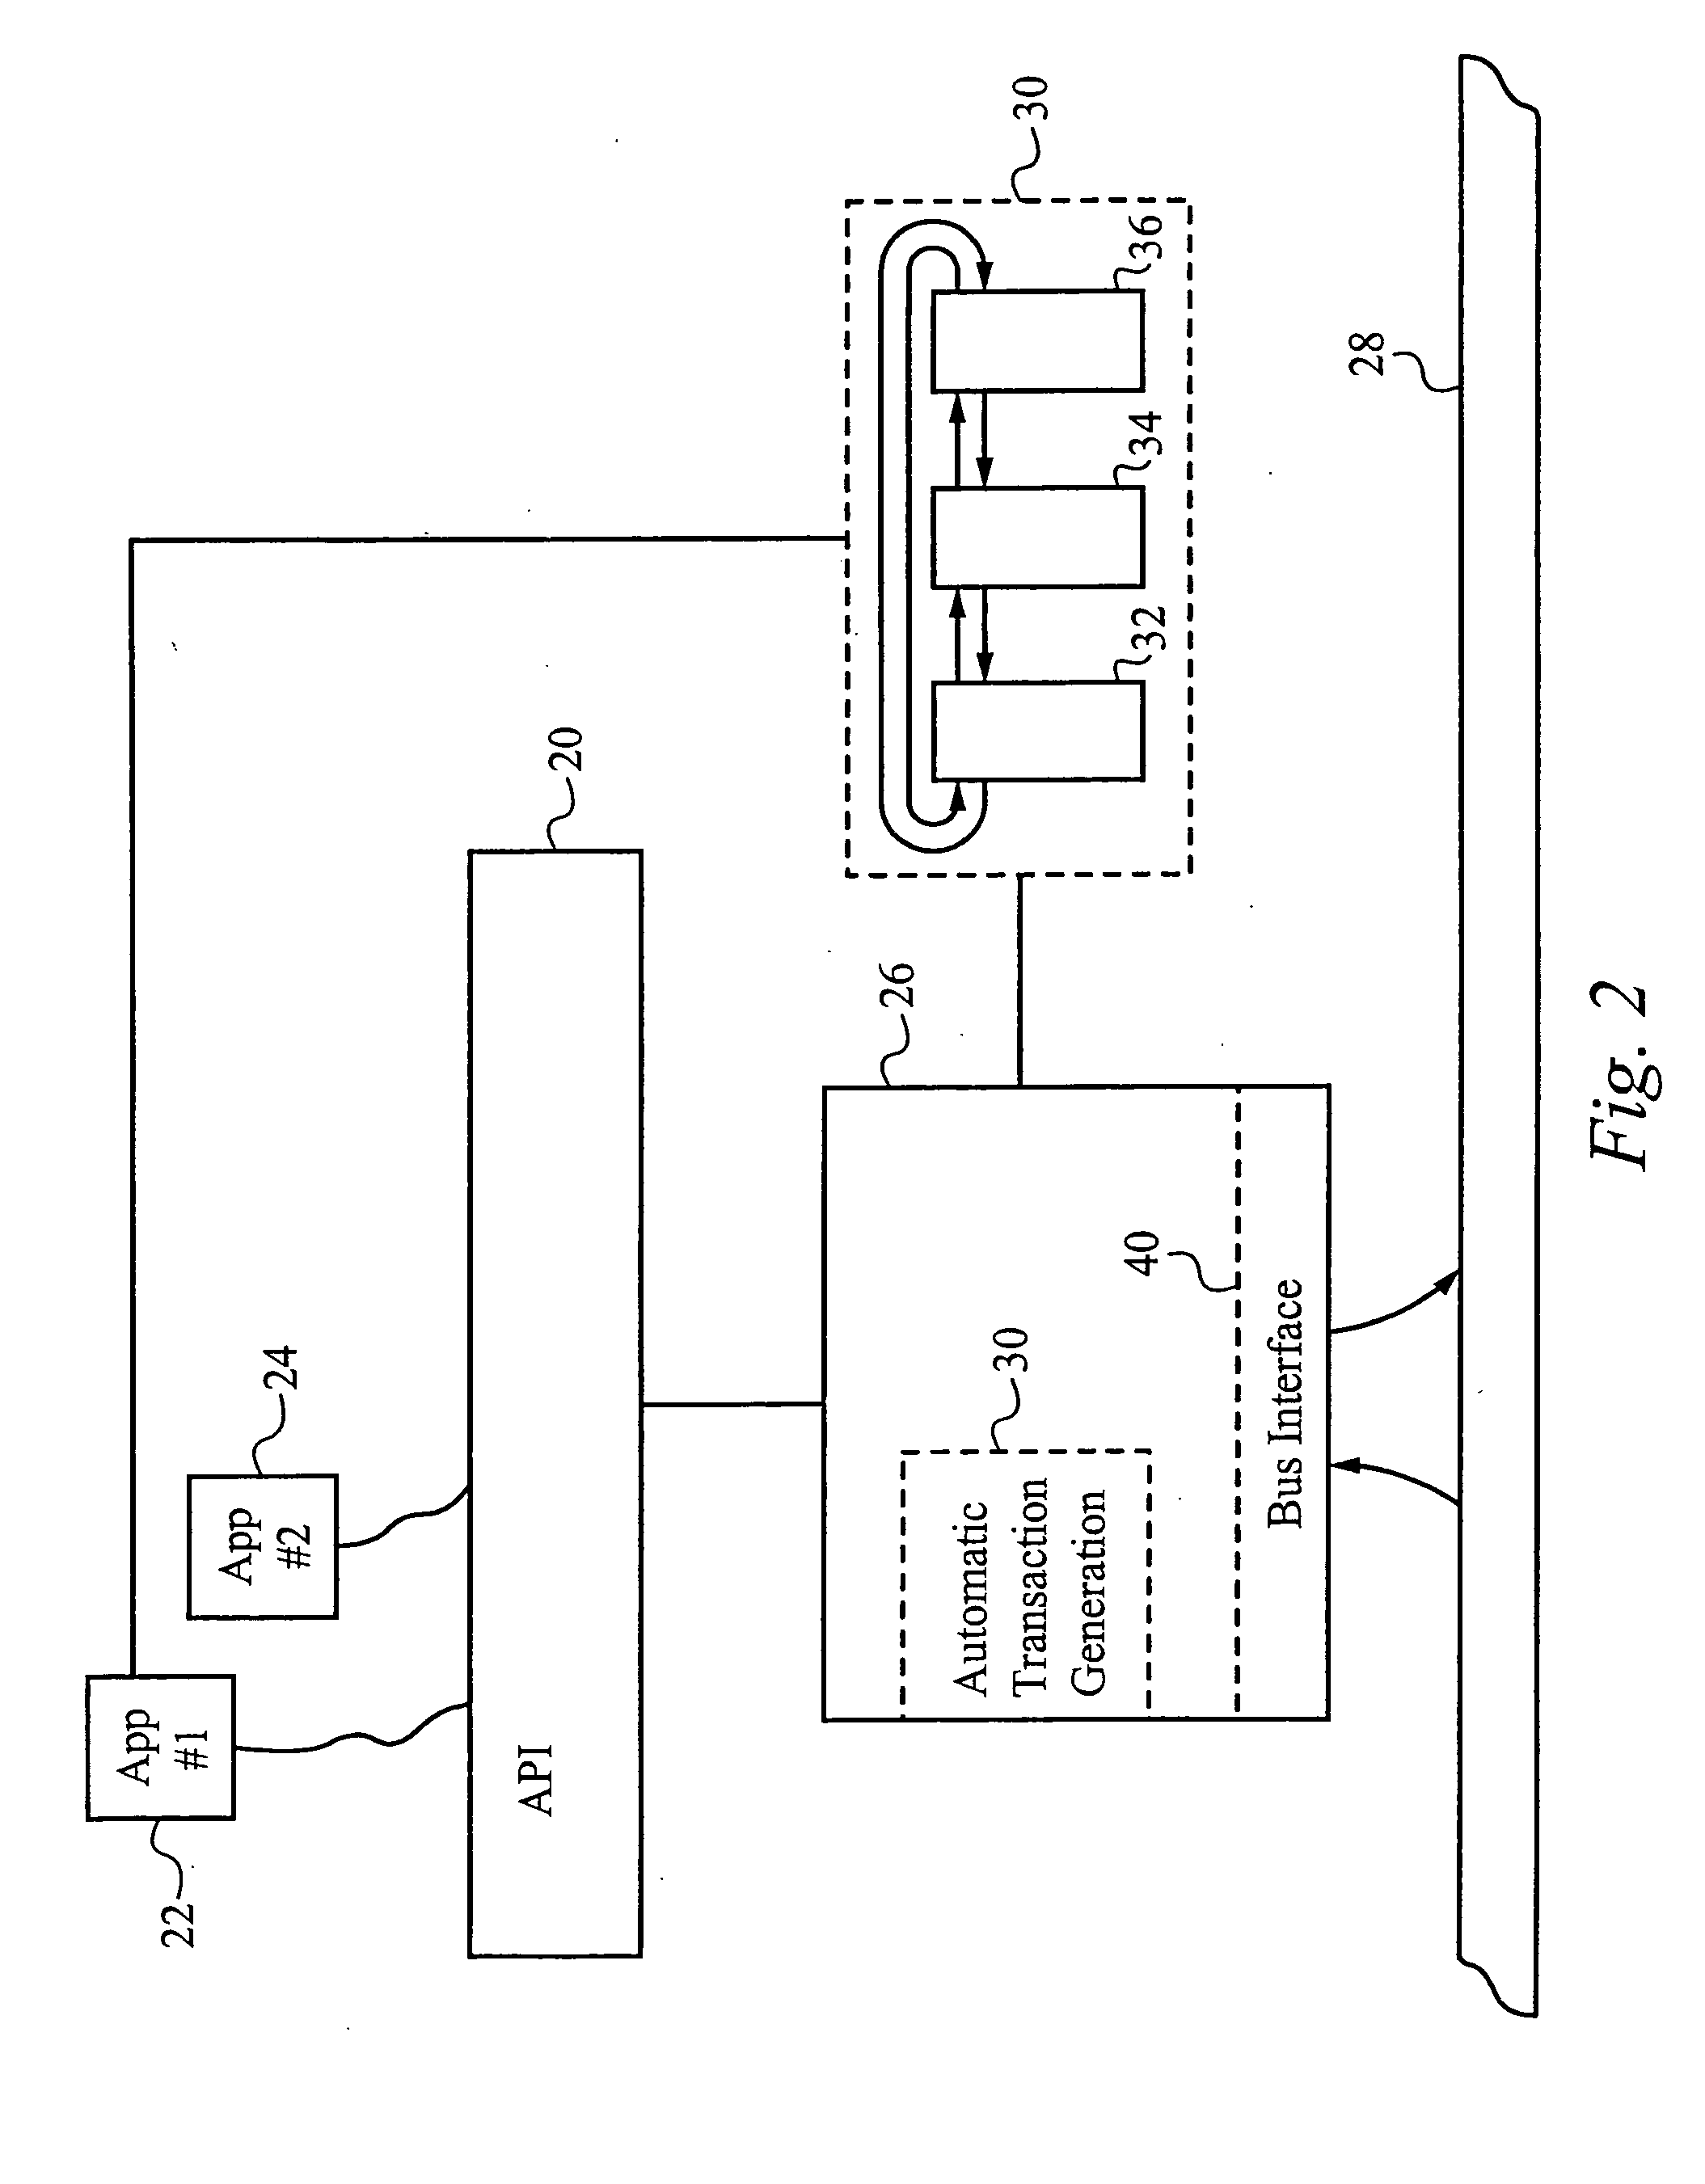 Application programming interface for data transfer and bus management over a bus structure